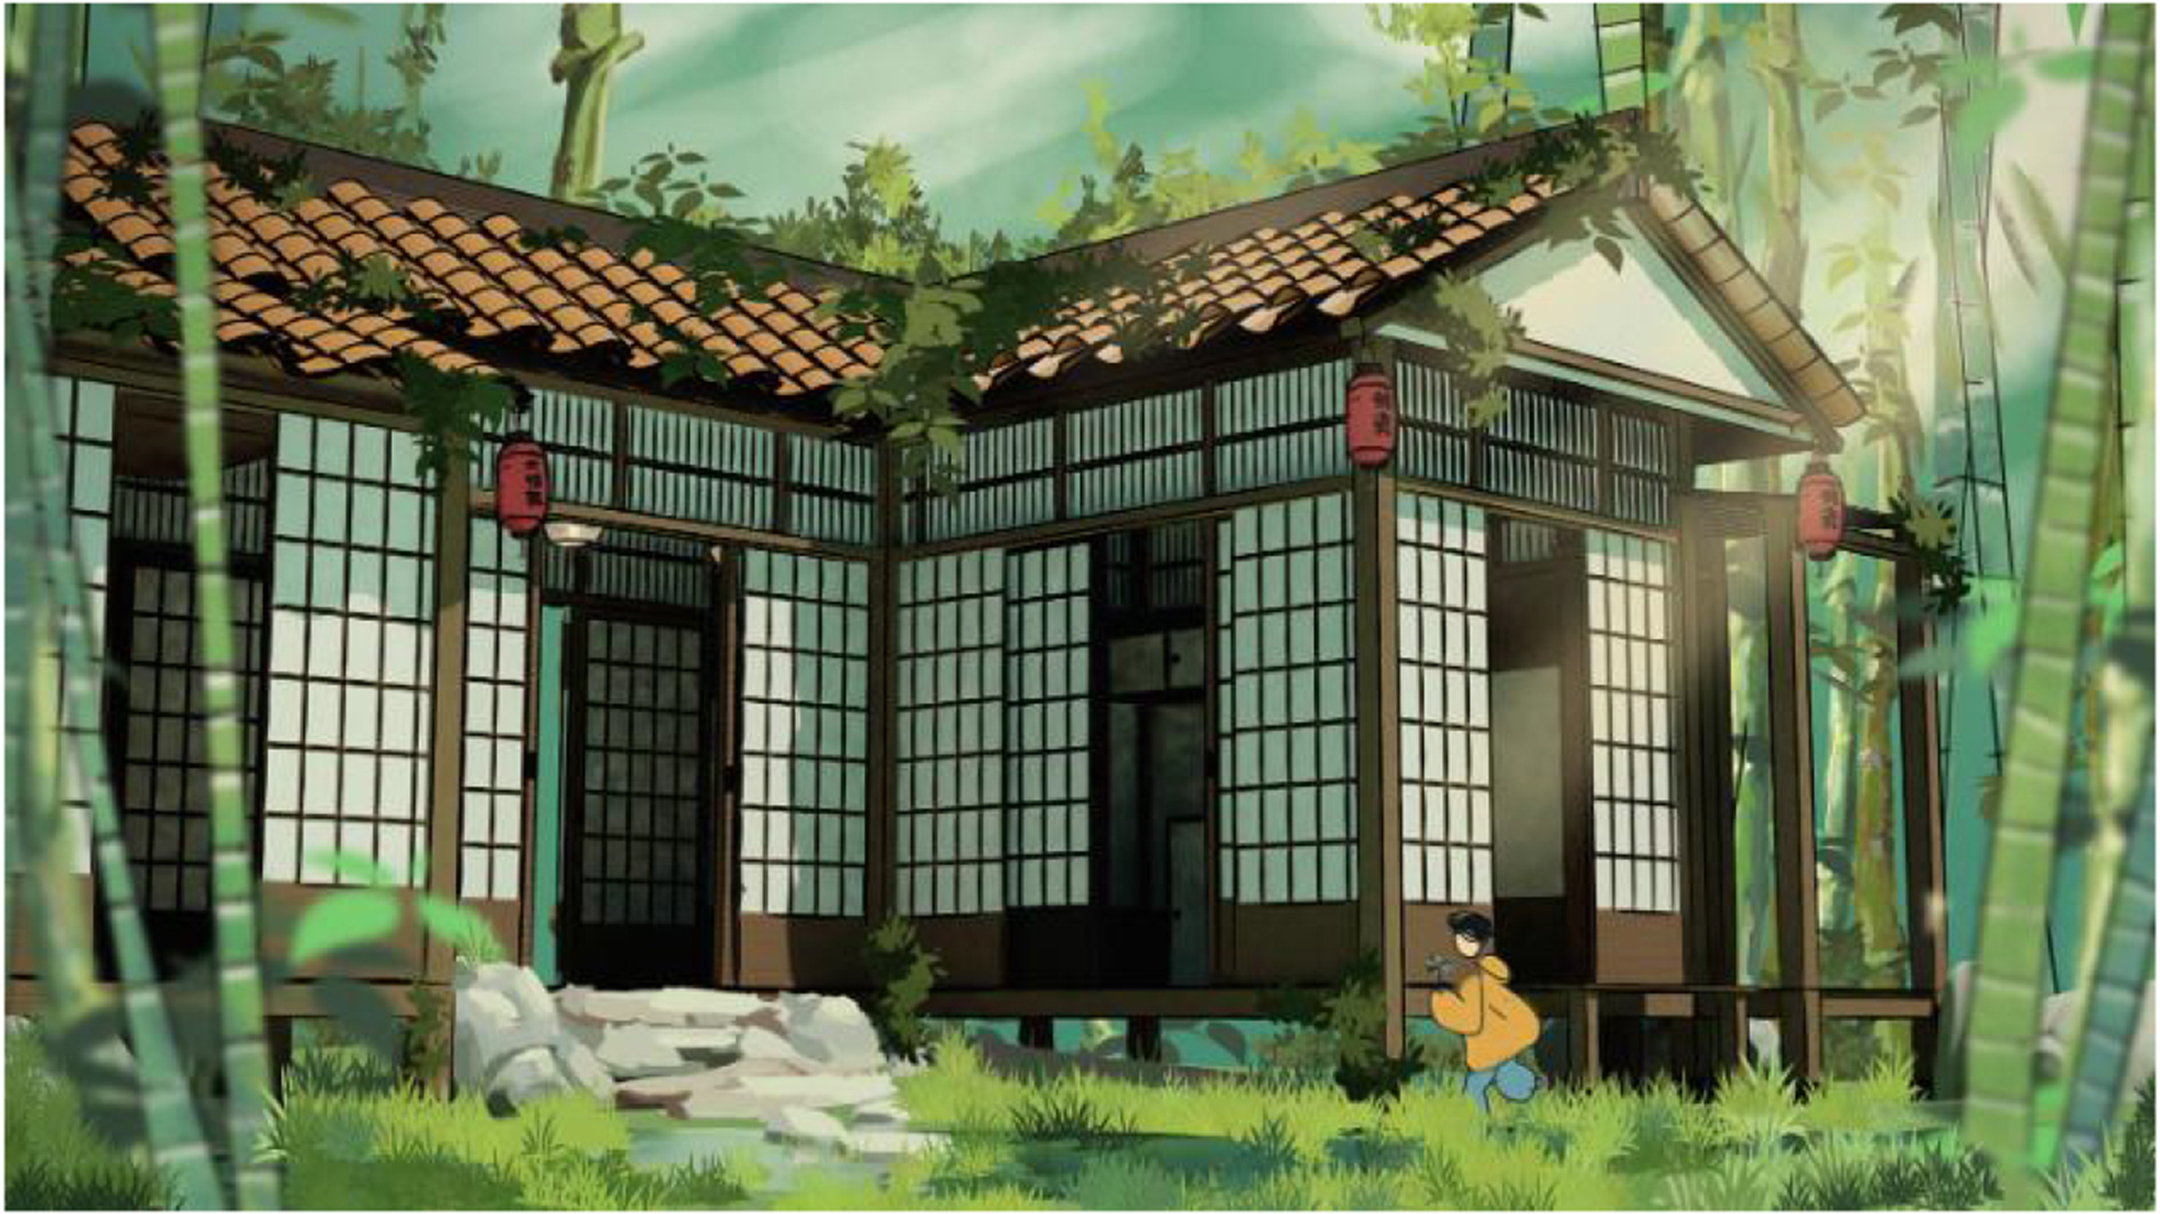 digital illustration of a person entering a large, classic-style Japanese home